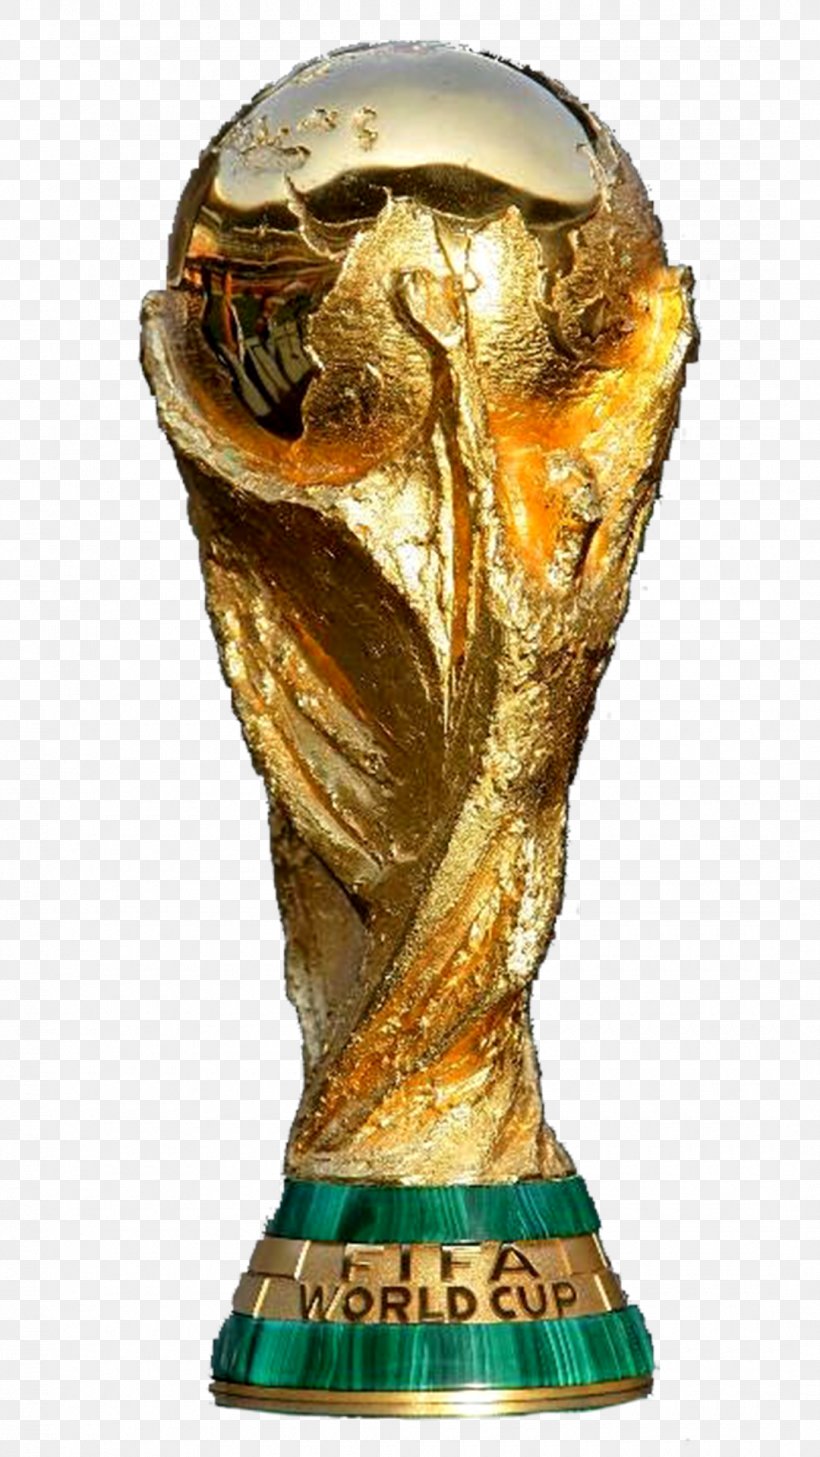 2010 FIFA World Cup South Africa 2014 FIFA World Cup 1998 FIFA World Cup FIFA World Cup Trophy, PNG, 1080x1920px, 1998 Fifa World Cup, 2010 Fifa World Cup, 2014 Fifa World Cup, 2018 Fifa World Cup, Artifact Download Free